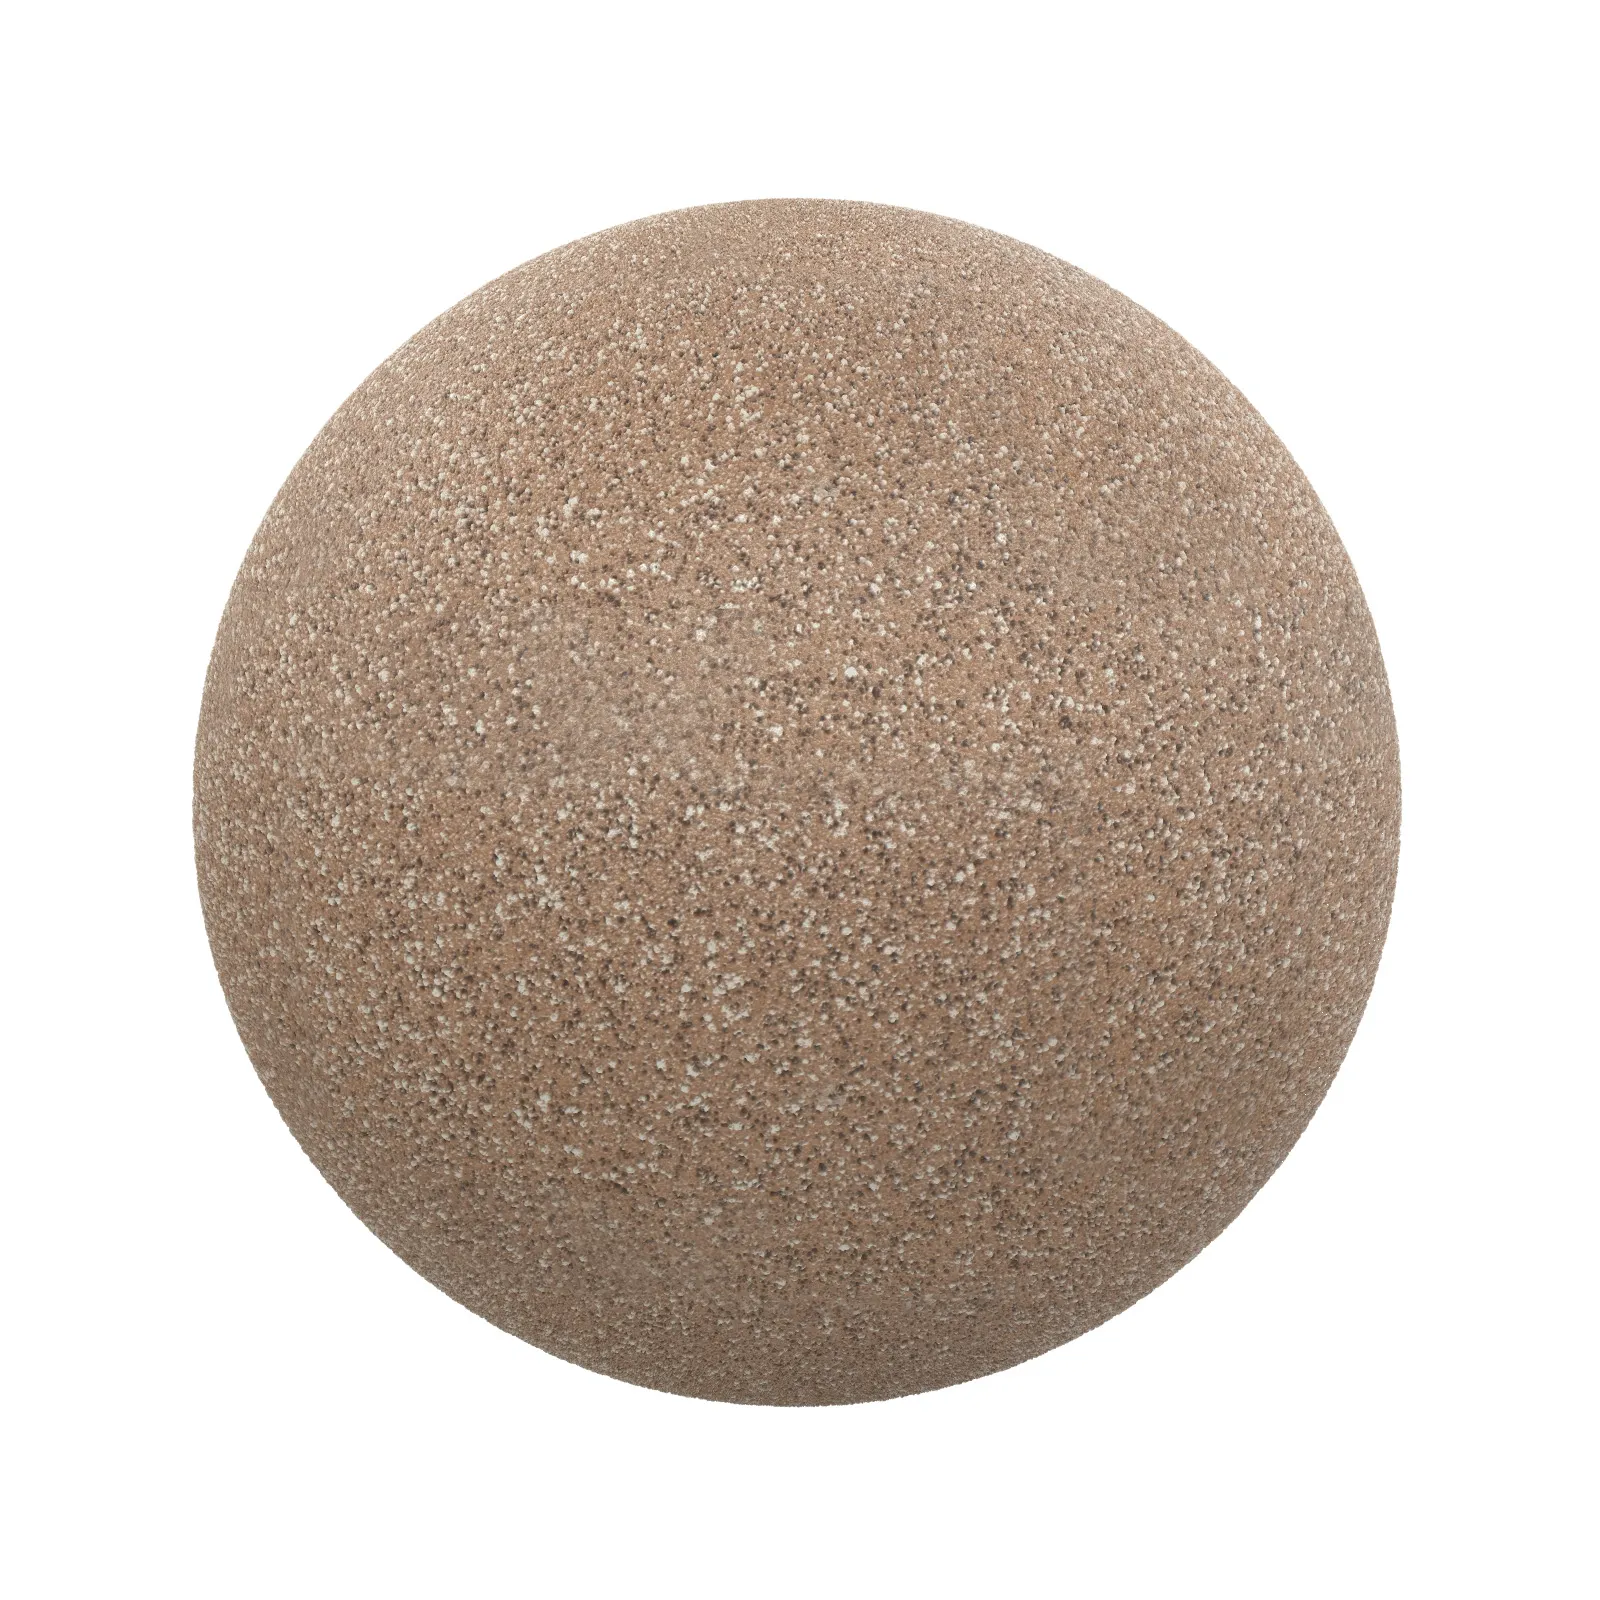 TEXTURES – STONES – CGAxis PBR Colection Vol 1 Stones – brown freckled stone